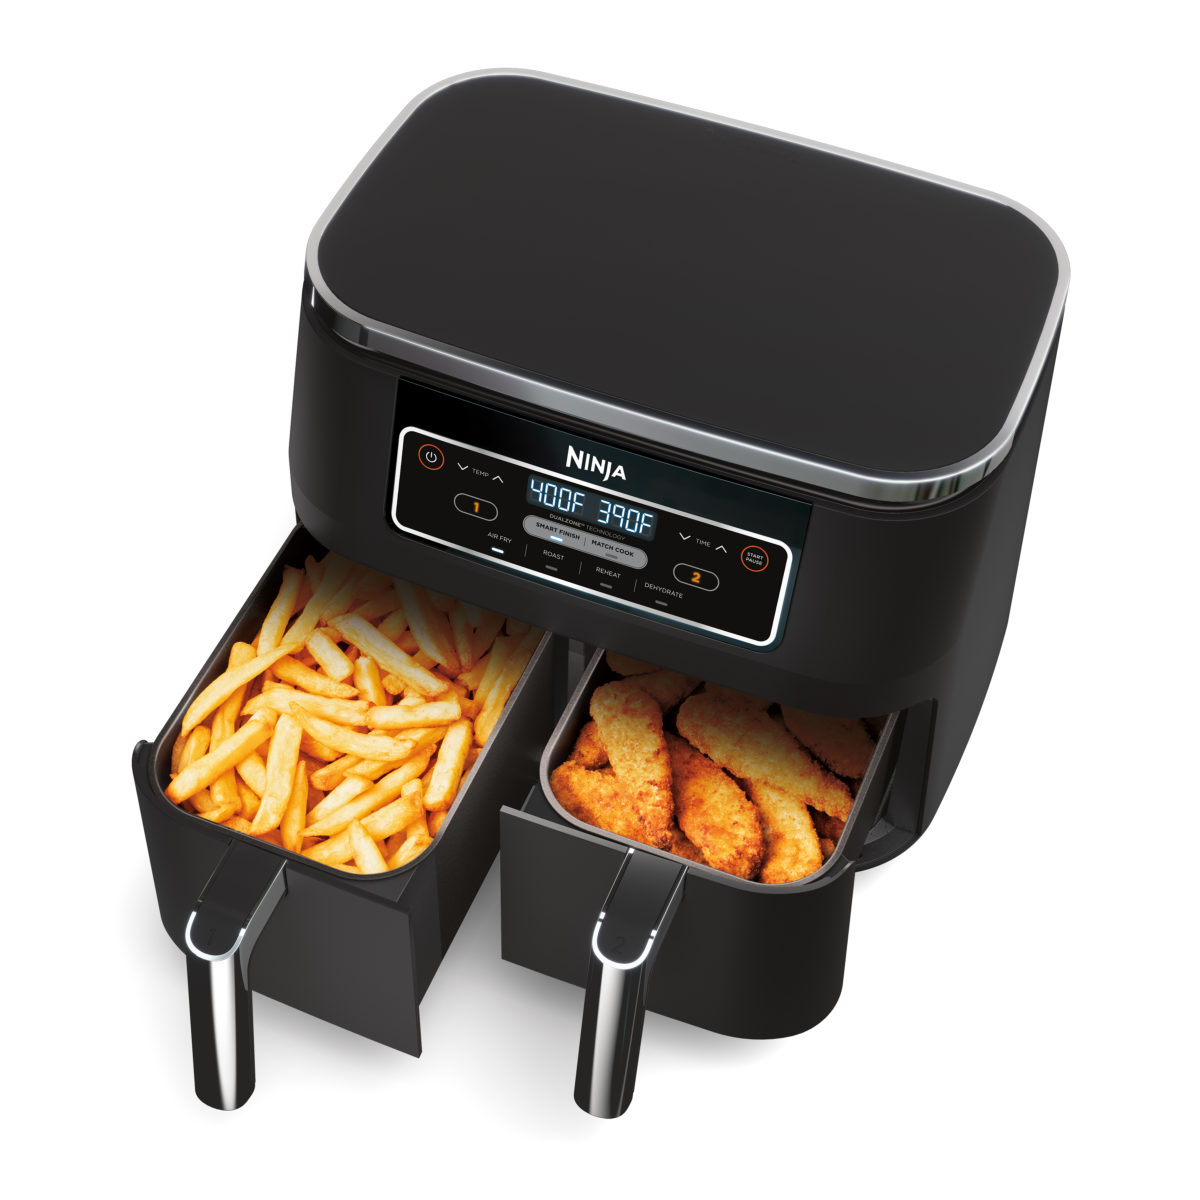 In the Market for an Air Fryer? Here are the Best 8 You Can Buy Right Now | Air fryers are one of the hottest items on the market right now!